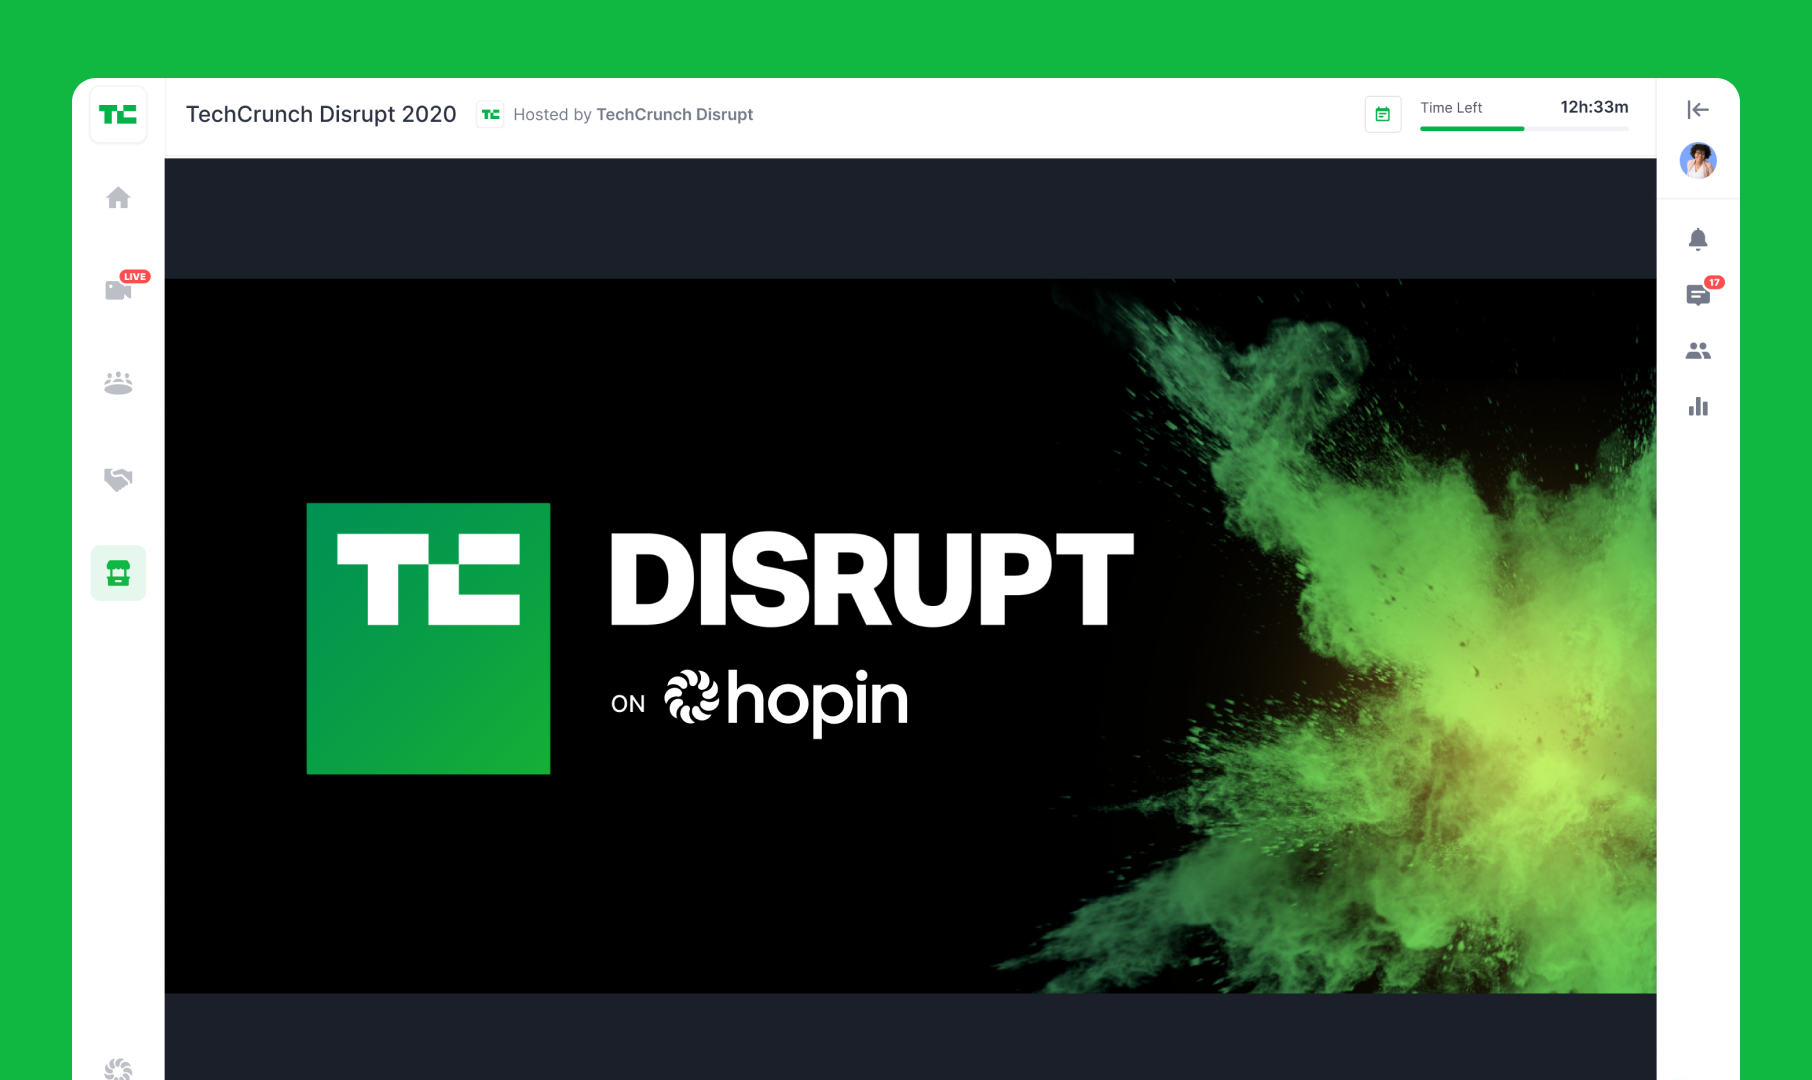 TechCrunch Disrupt Conference Hosted on Hopin